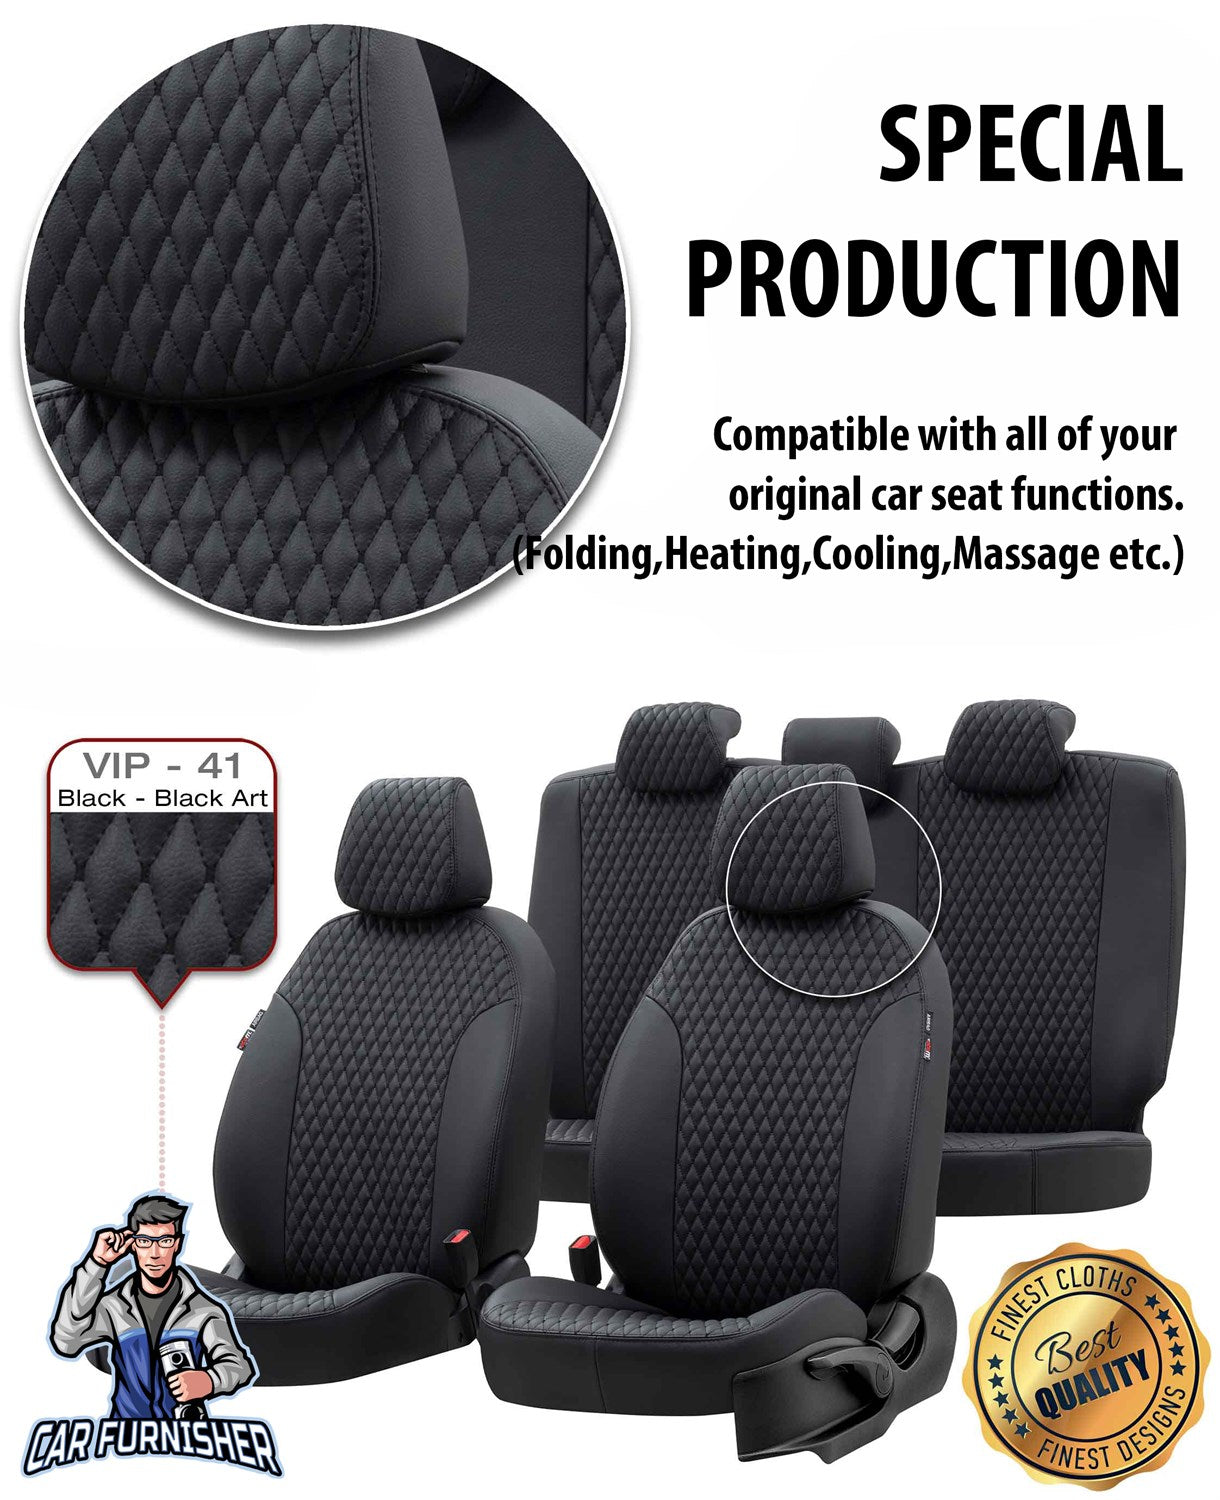 Toyota Avensis Seat Cover Amsterdam Leather Design Black Leather